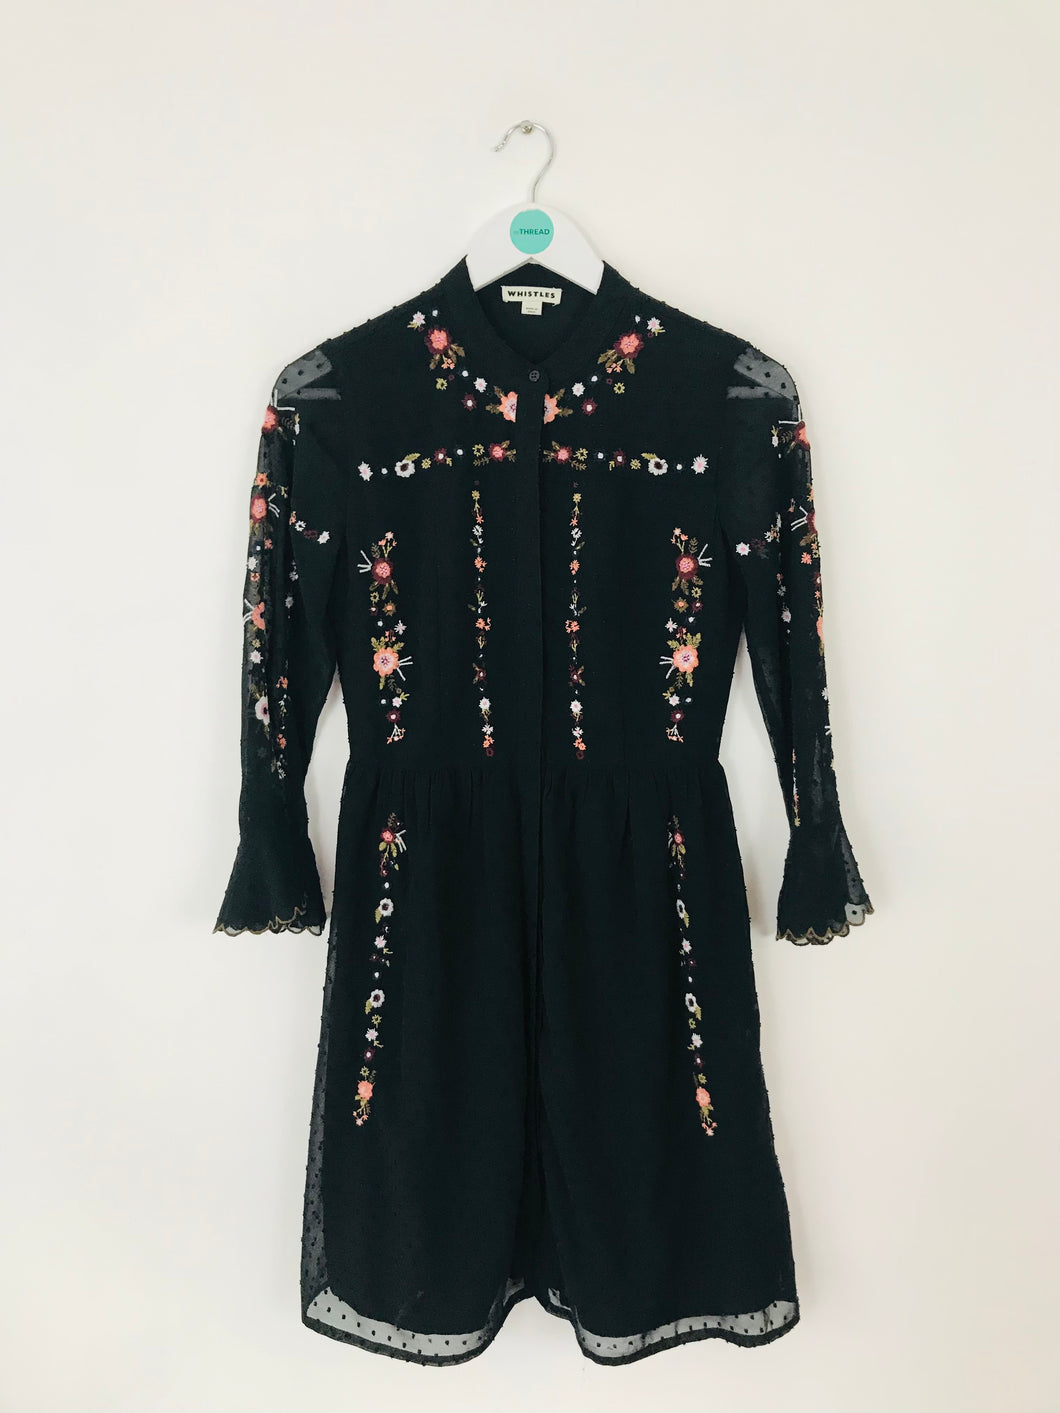 Whistles Women’s Floral Embroidered Long Sleeve Dress | UK6 | Black